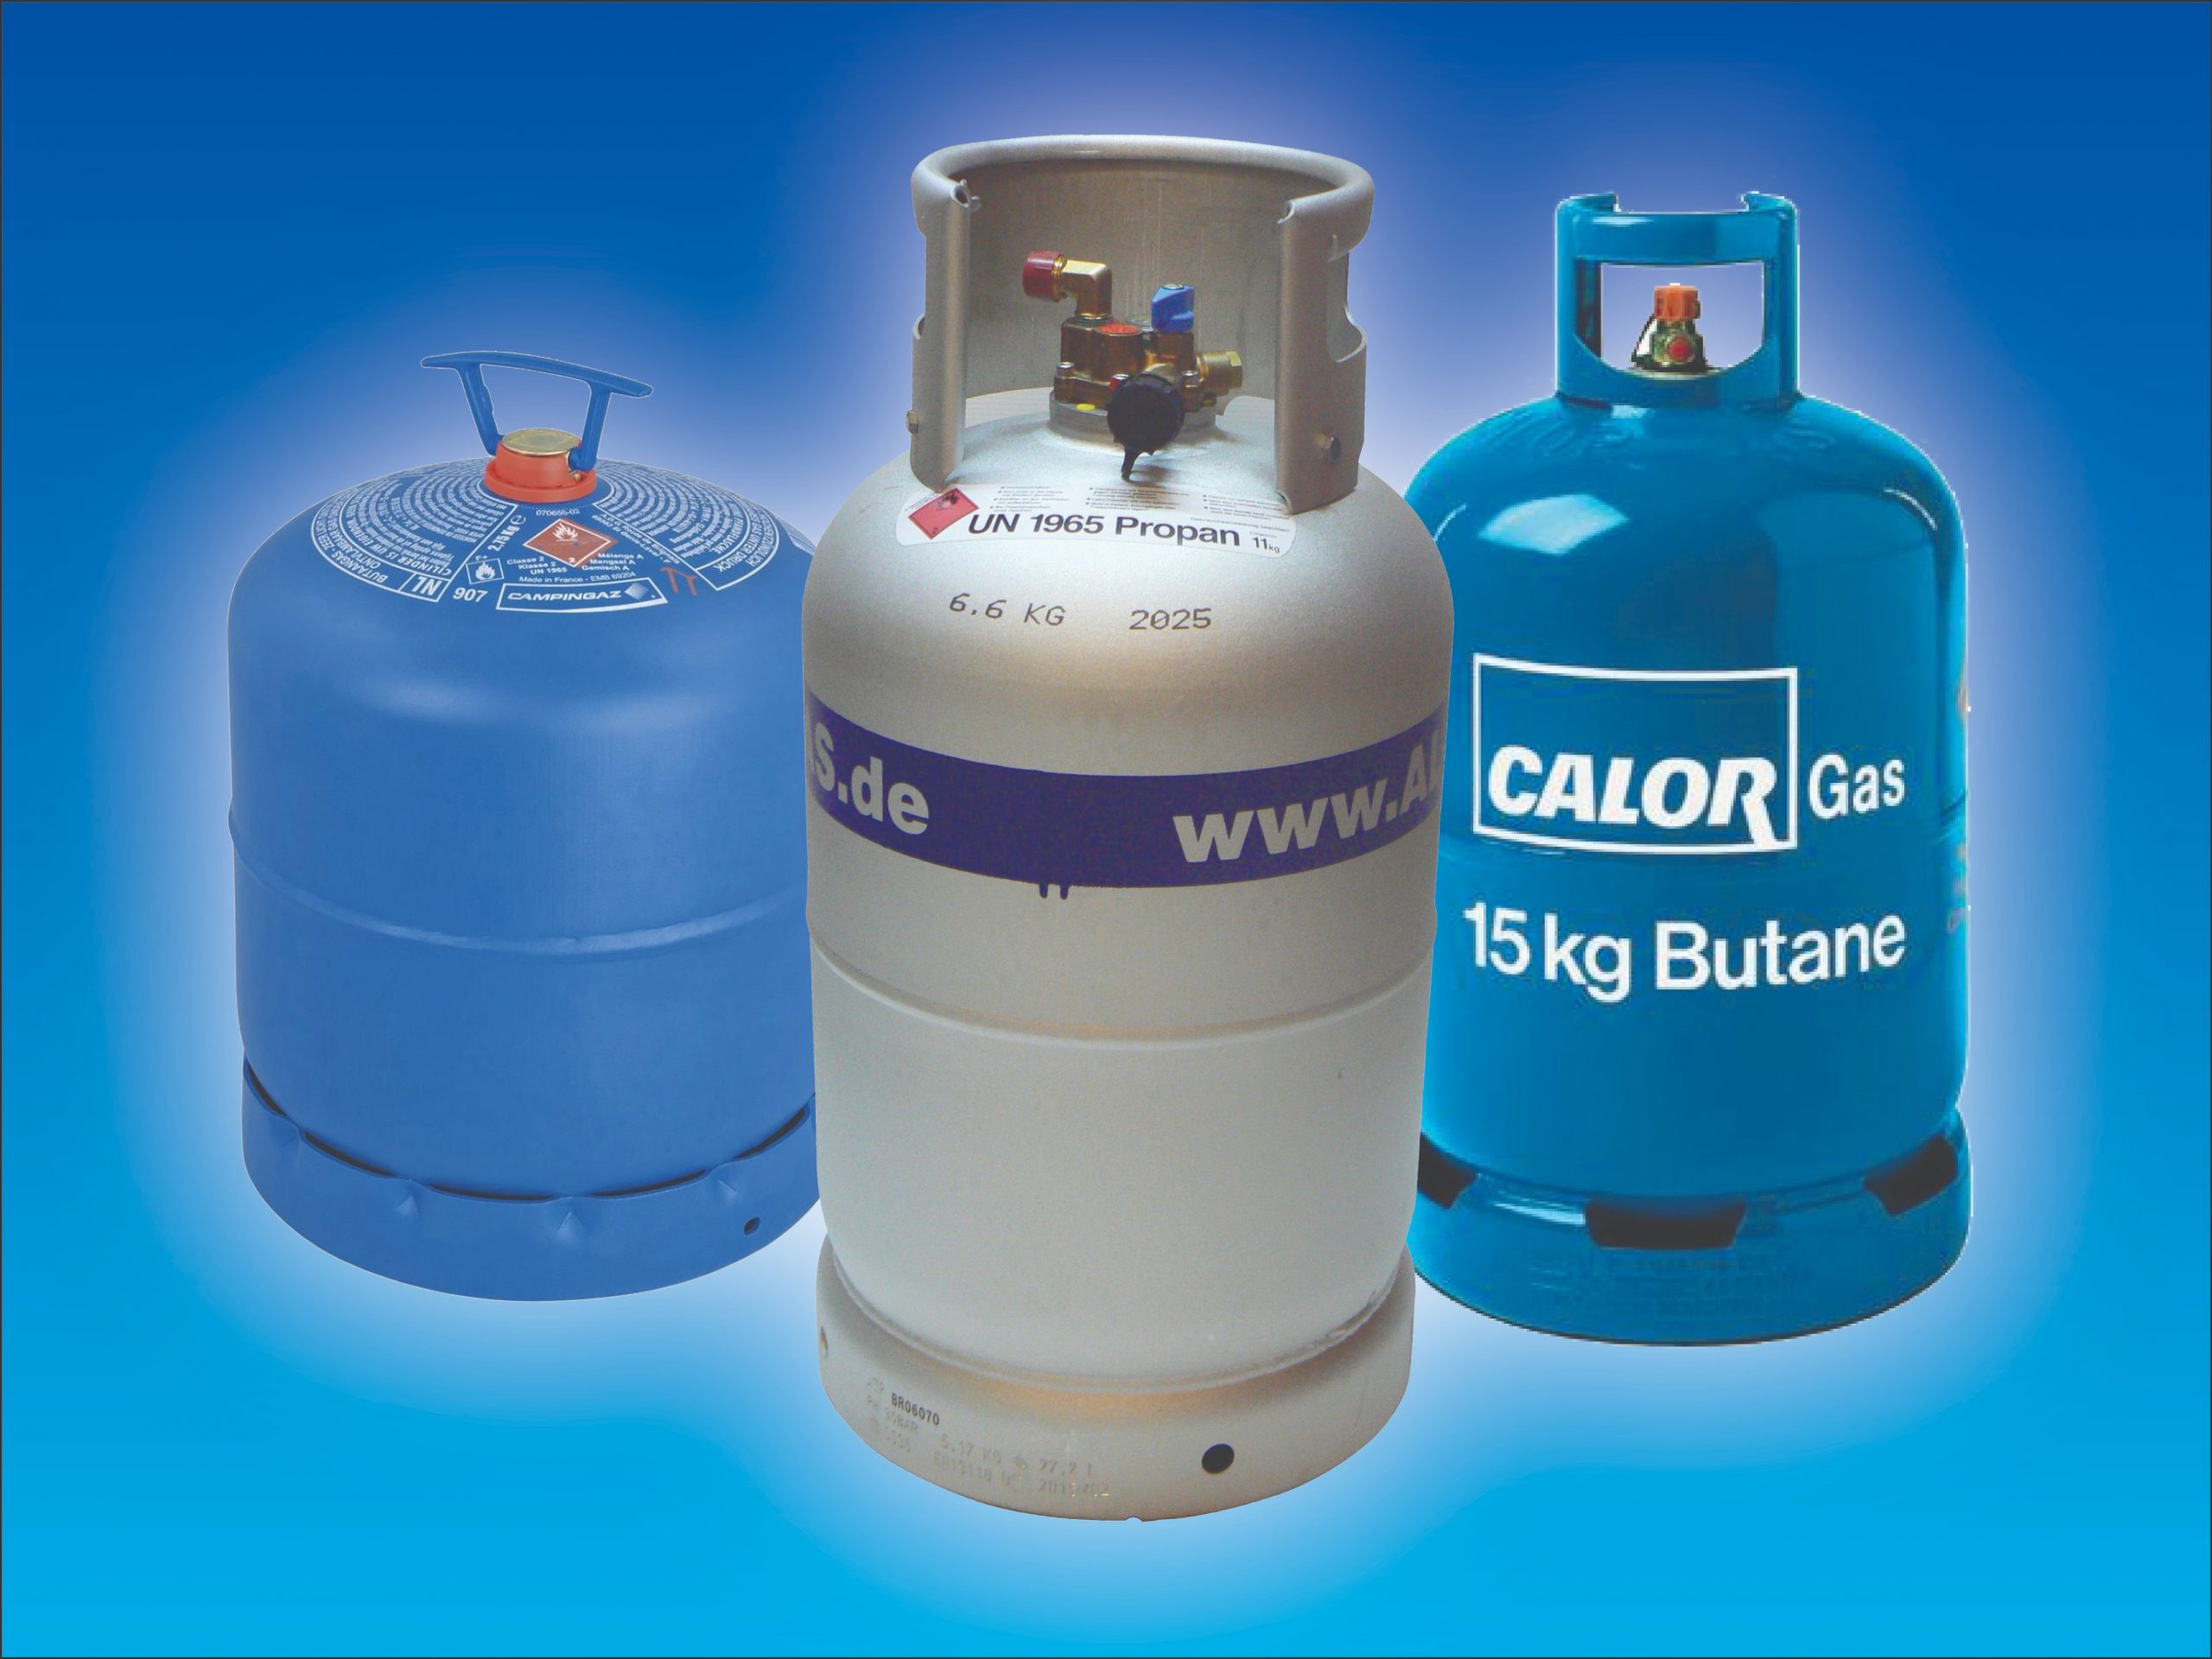 Euro Bottle to ALL OF Europe Adaptor Refill LPG Propane Cylinders